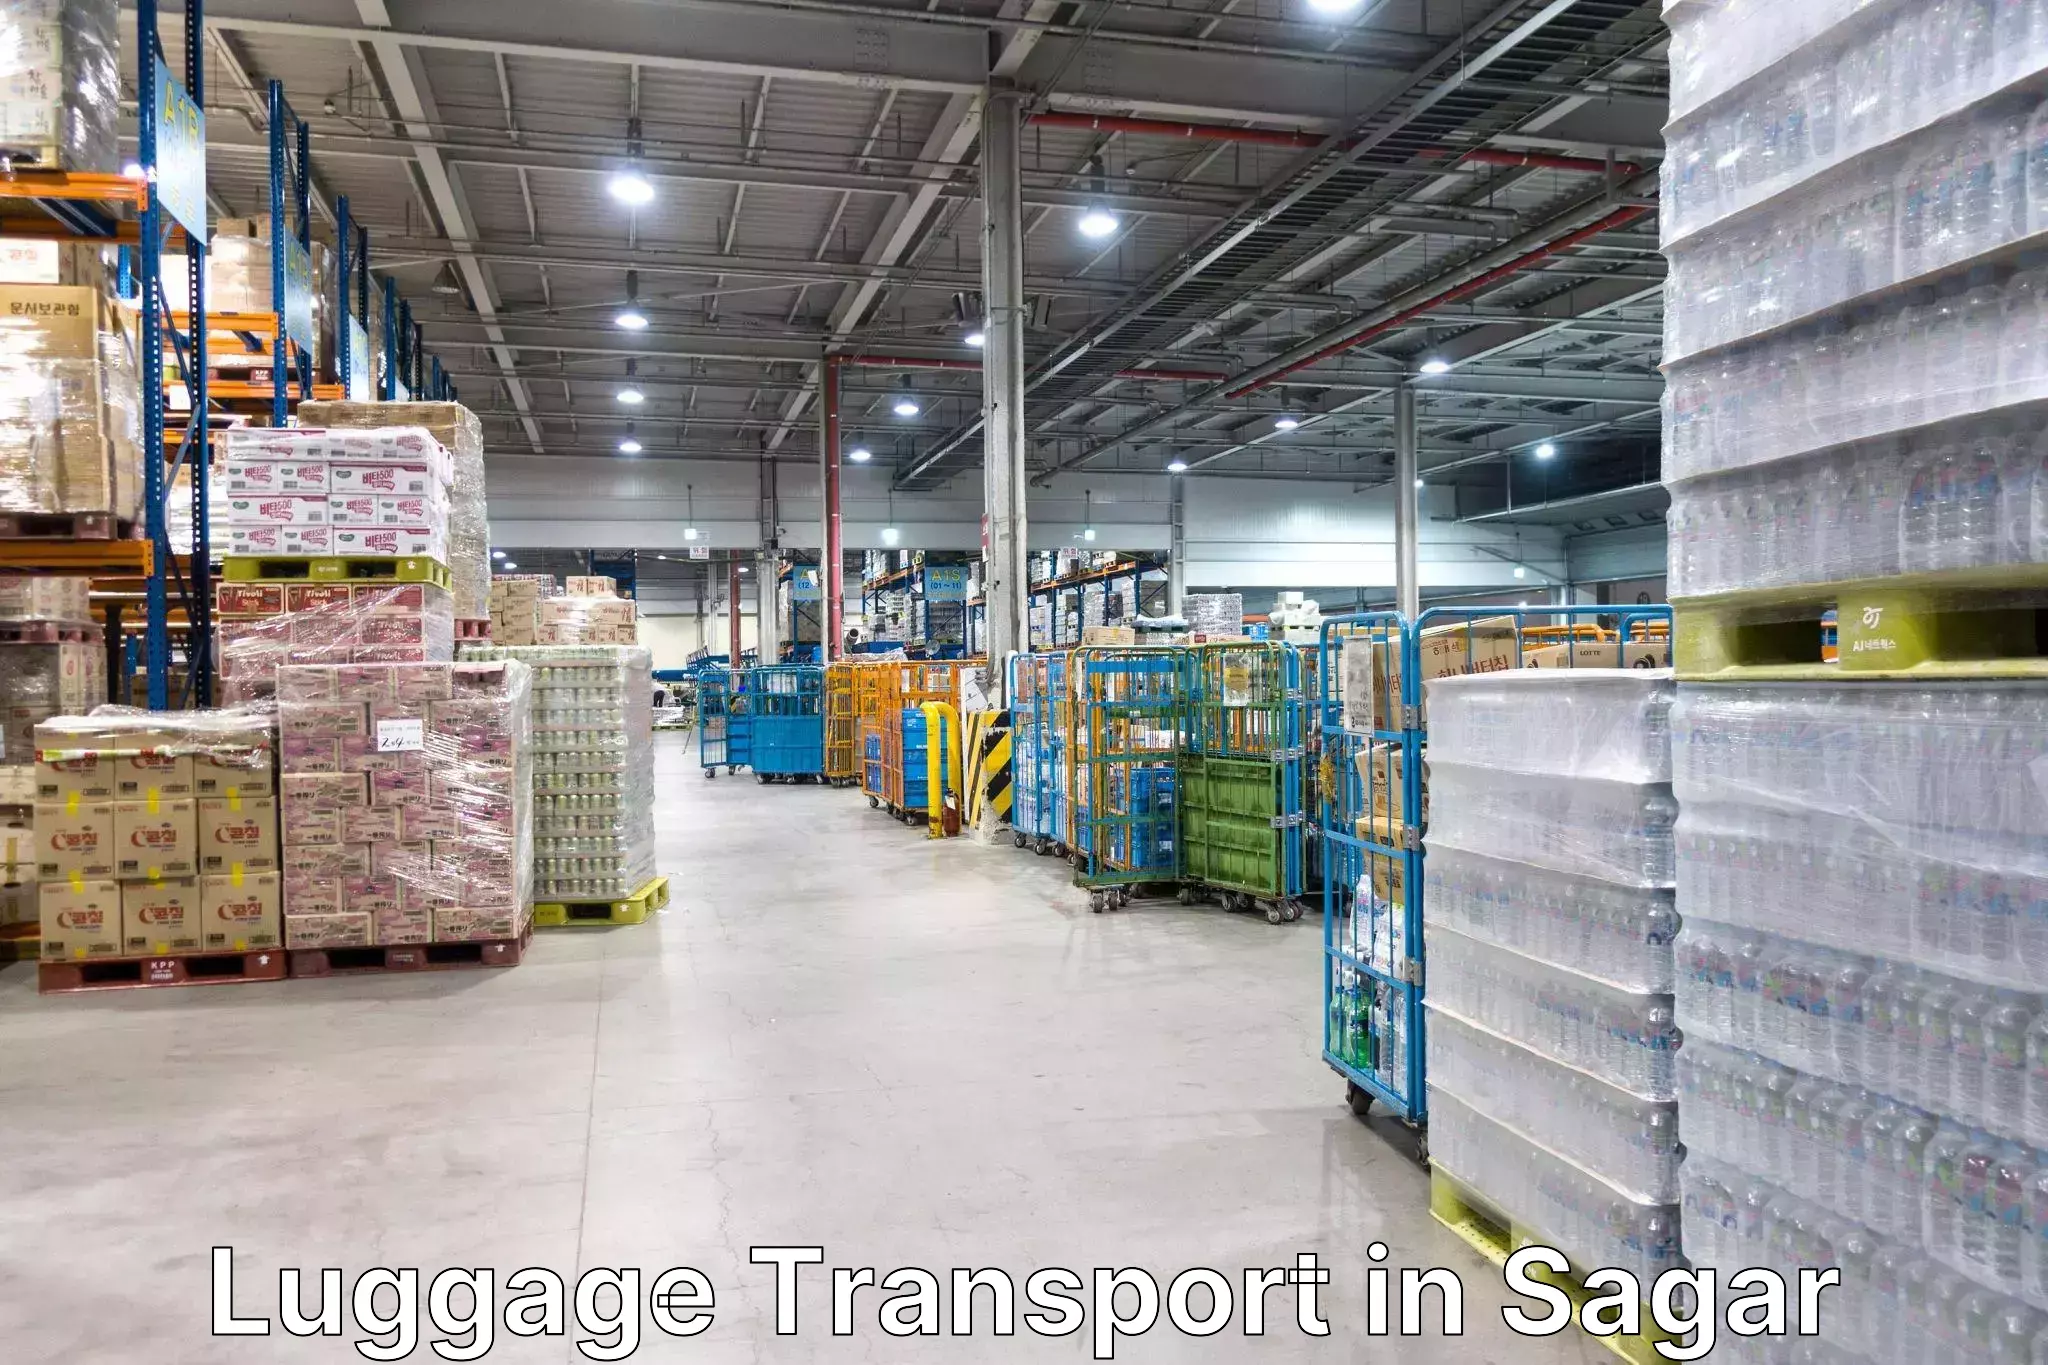 Luggage transport consulting in Sagar